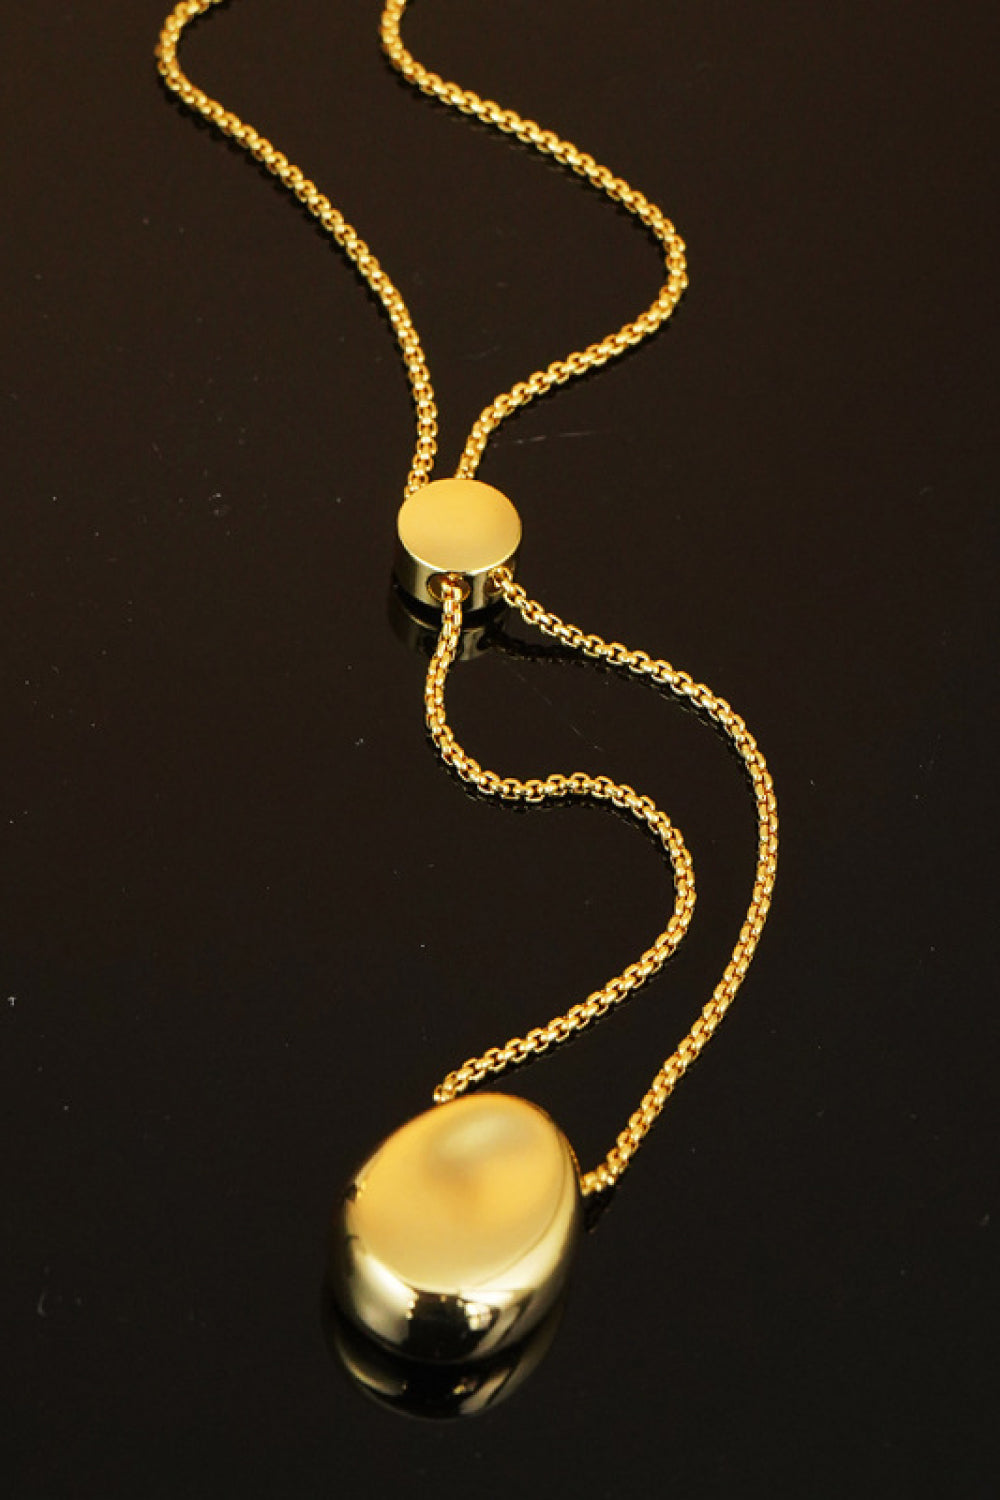 18K Gold-Plated Sweater Chain Necklace